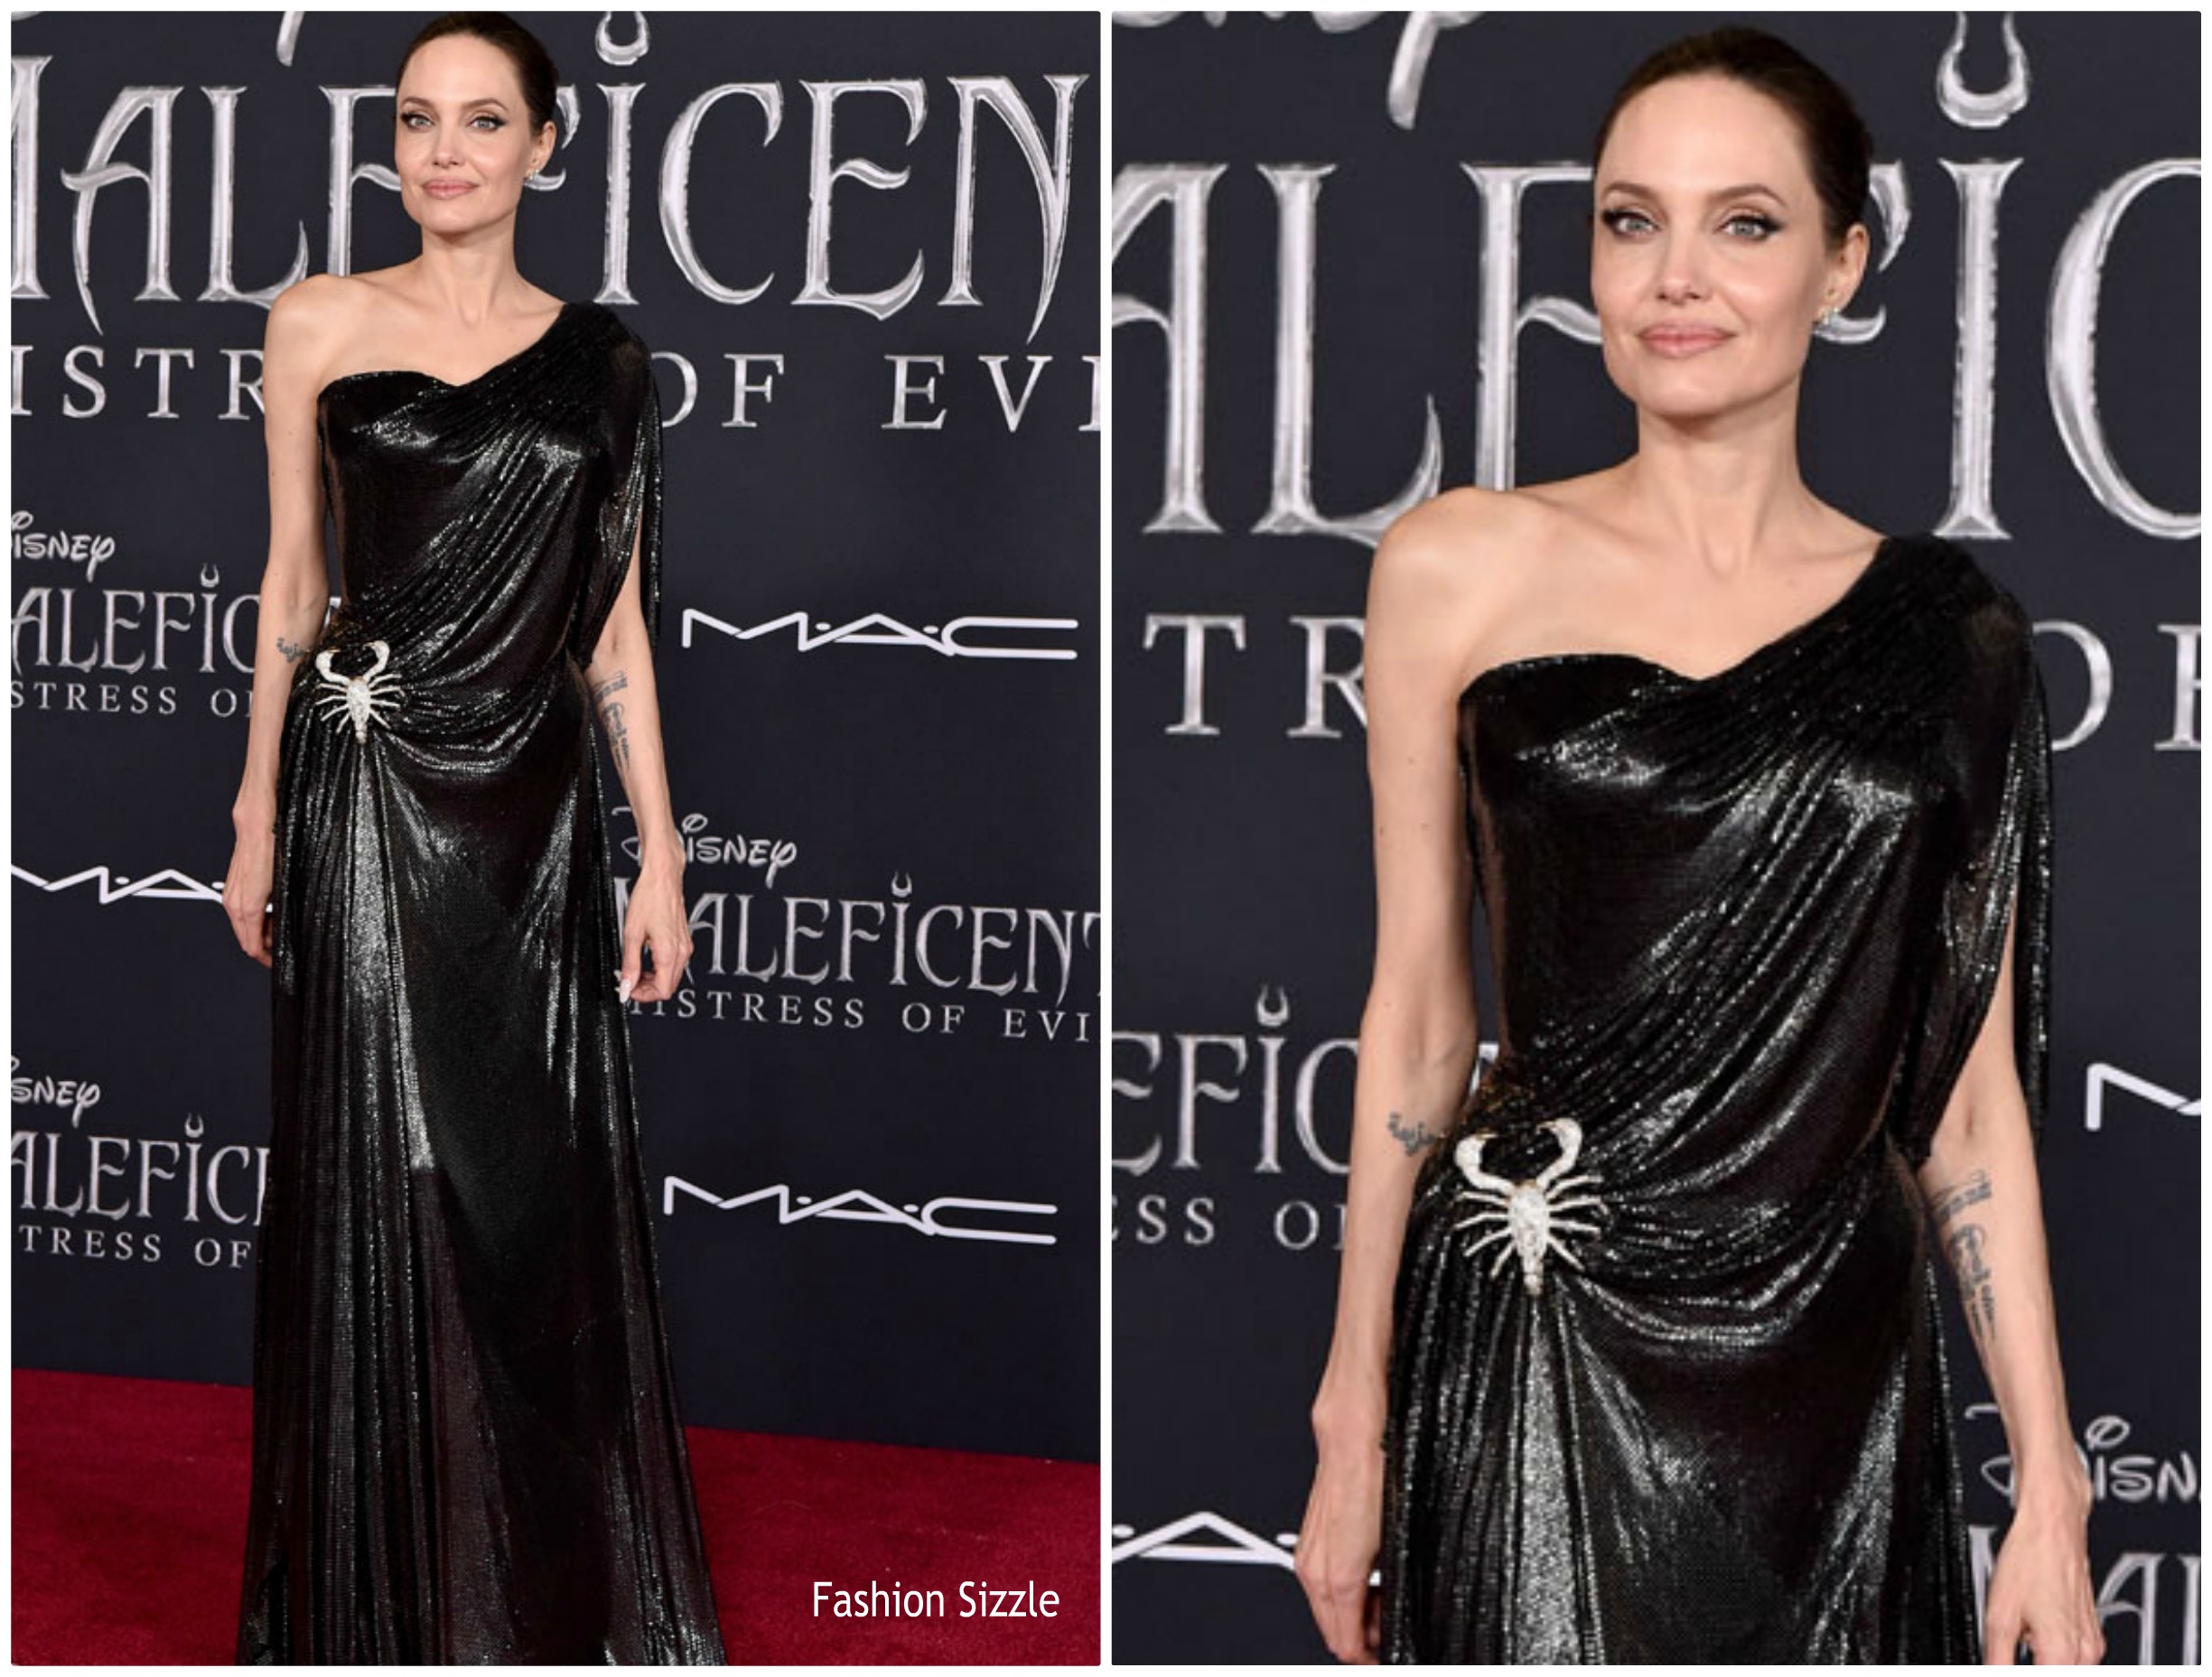 Angelina Jolie  In  Atelier Versace  @ The ‘Maleficent: Mistress Of Evil’ World Premiere